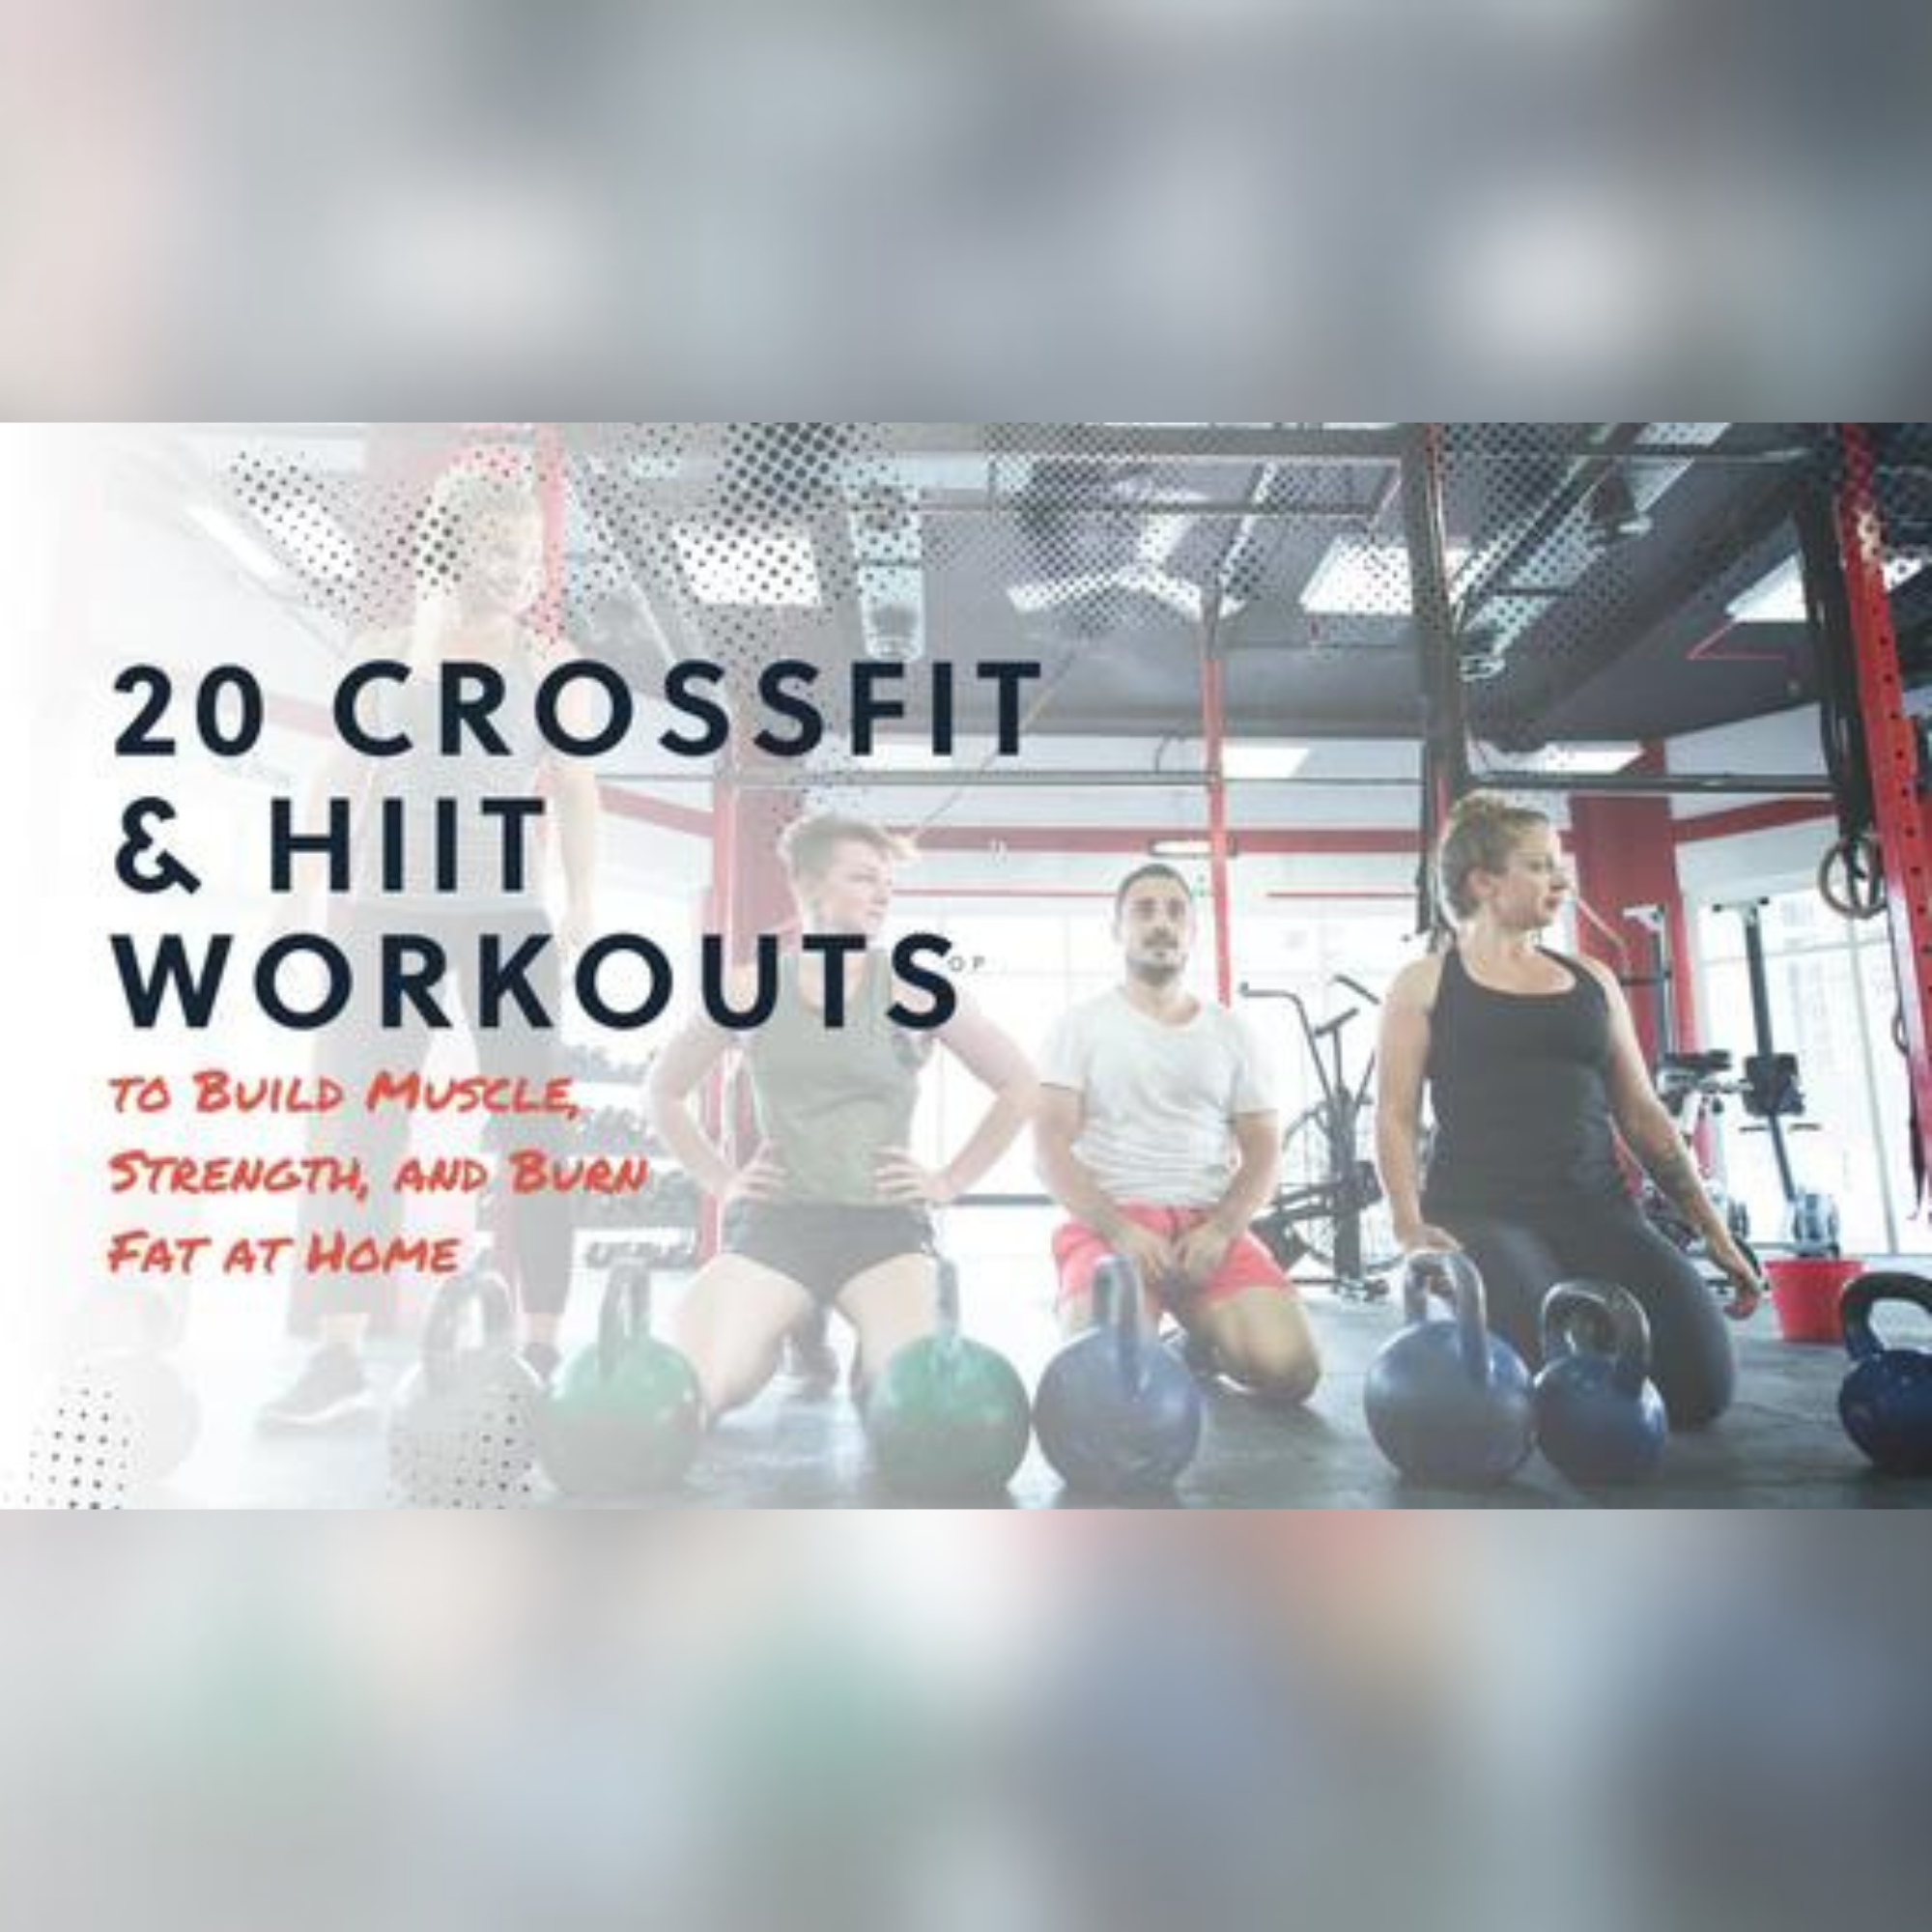 20 CrossFit and HIIT Workouts to Build Muscle, Strength, and Burn